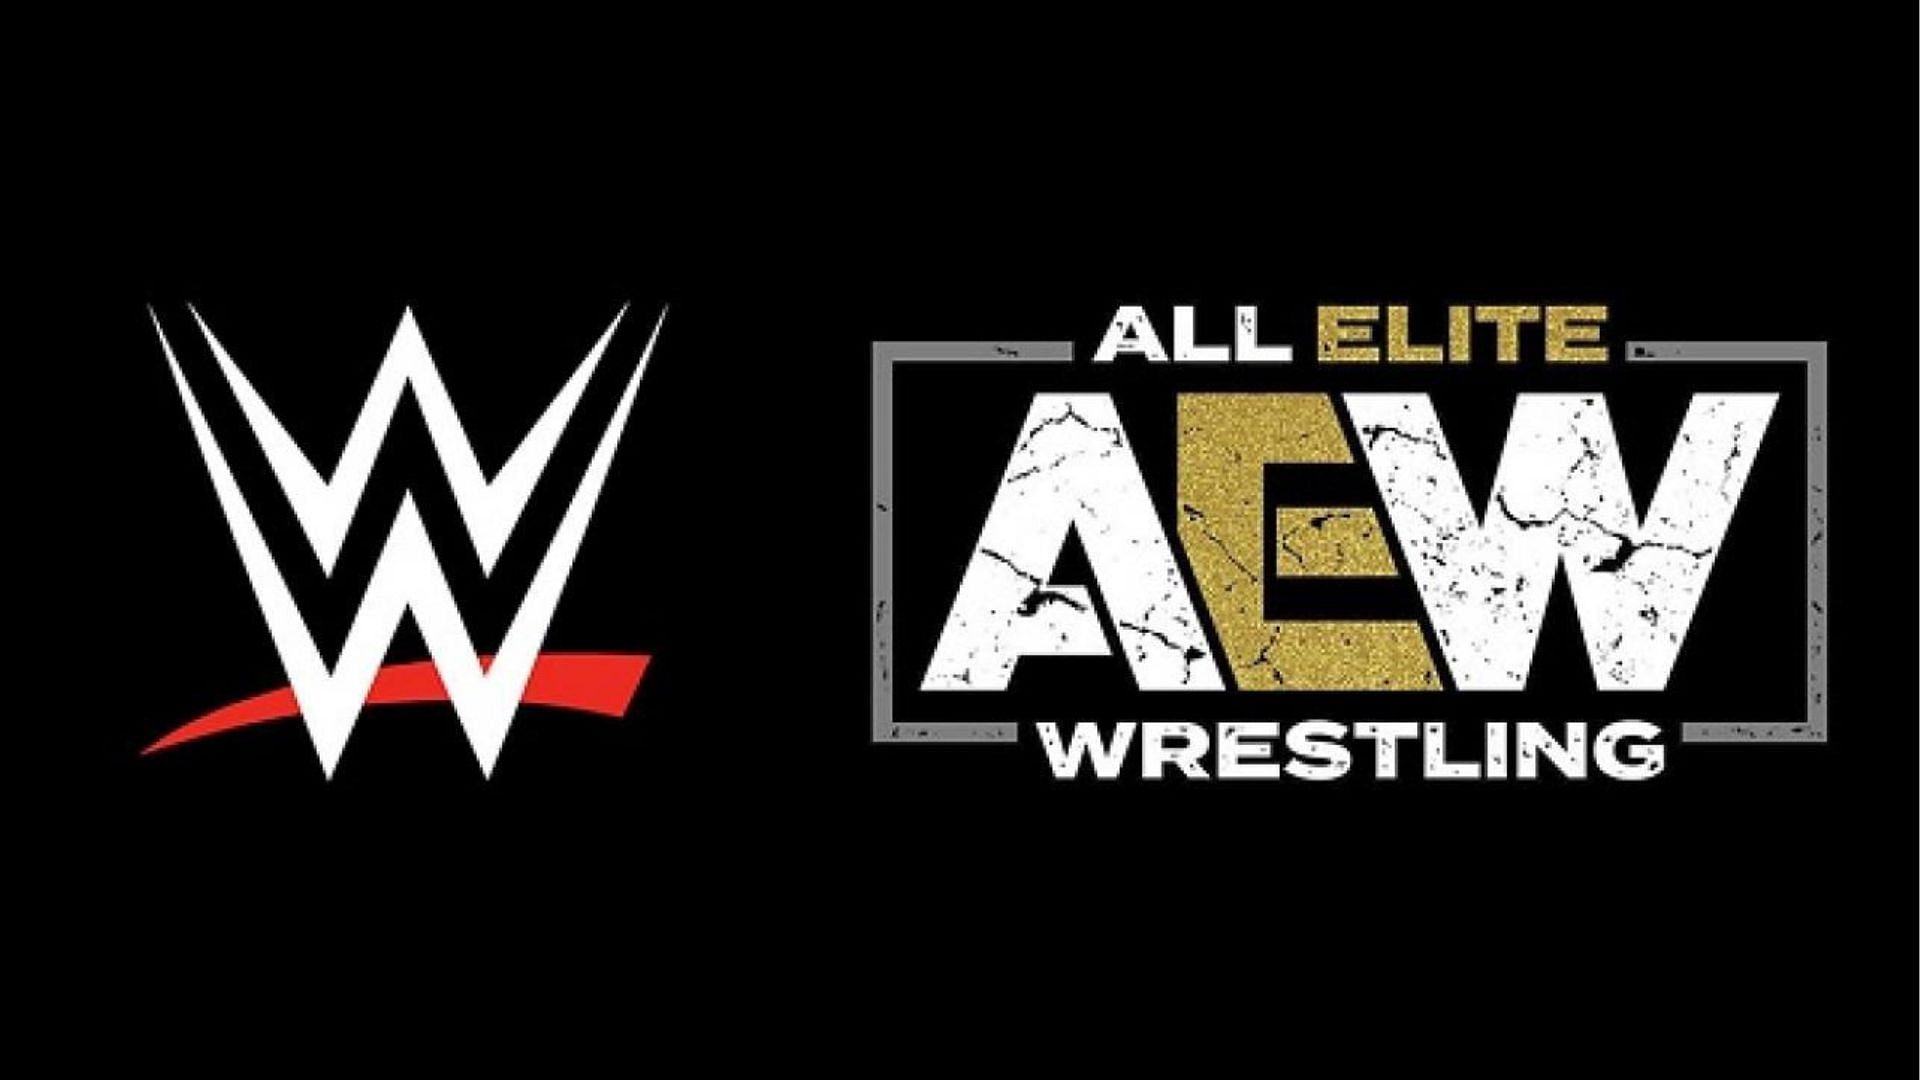 Several former WWE stars have made the jump to AEW